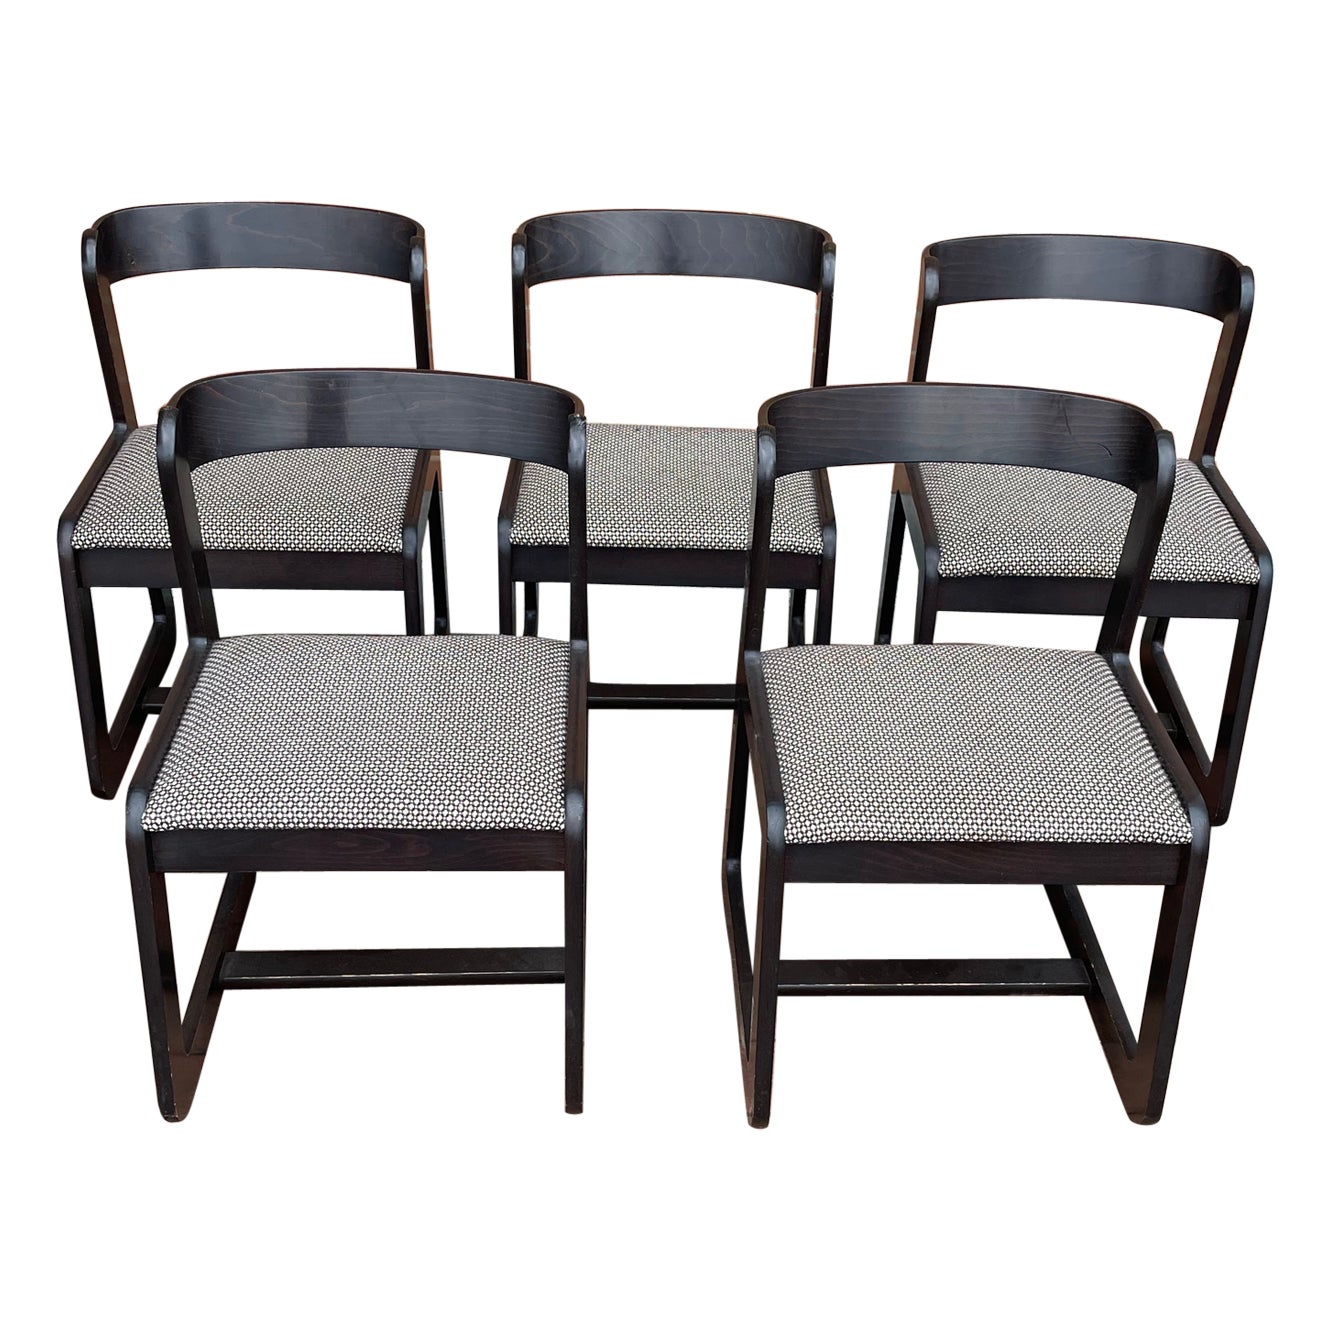 Set 5 Willy Rizzo Chairs for Mario Sabot, 1970s, Italy